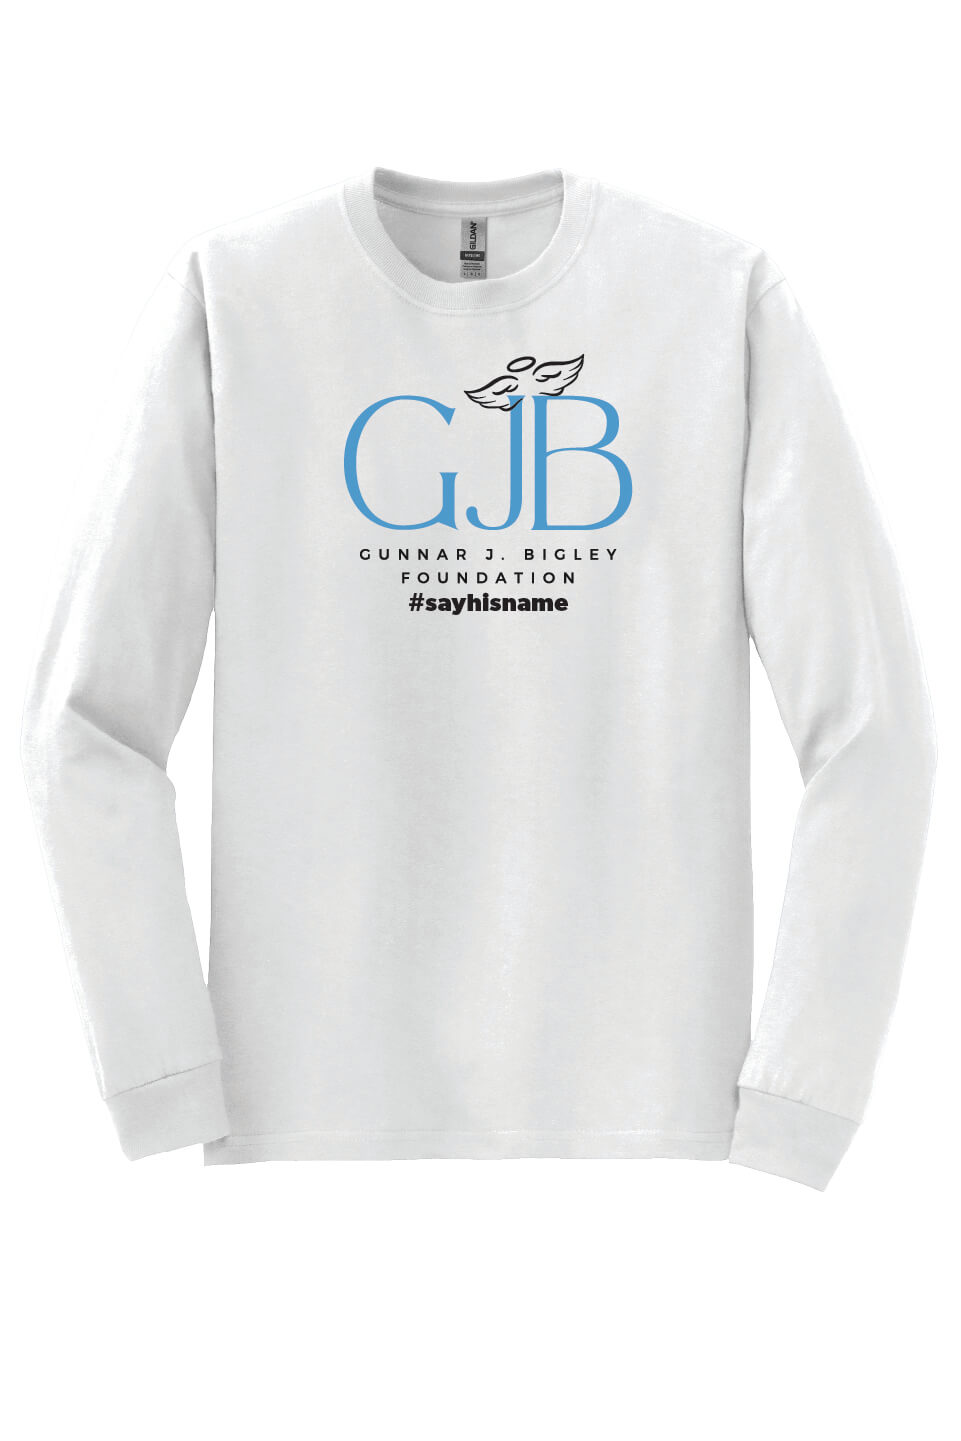 Long Sleeve T-Shirt (Youth) - Word Art II white front